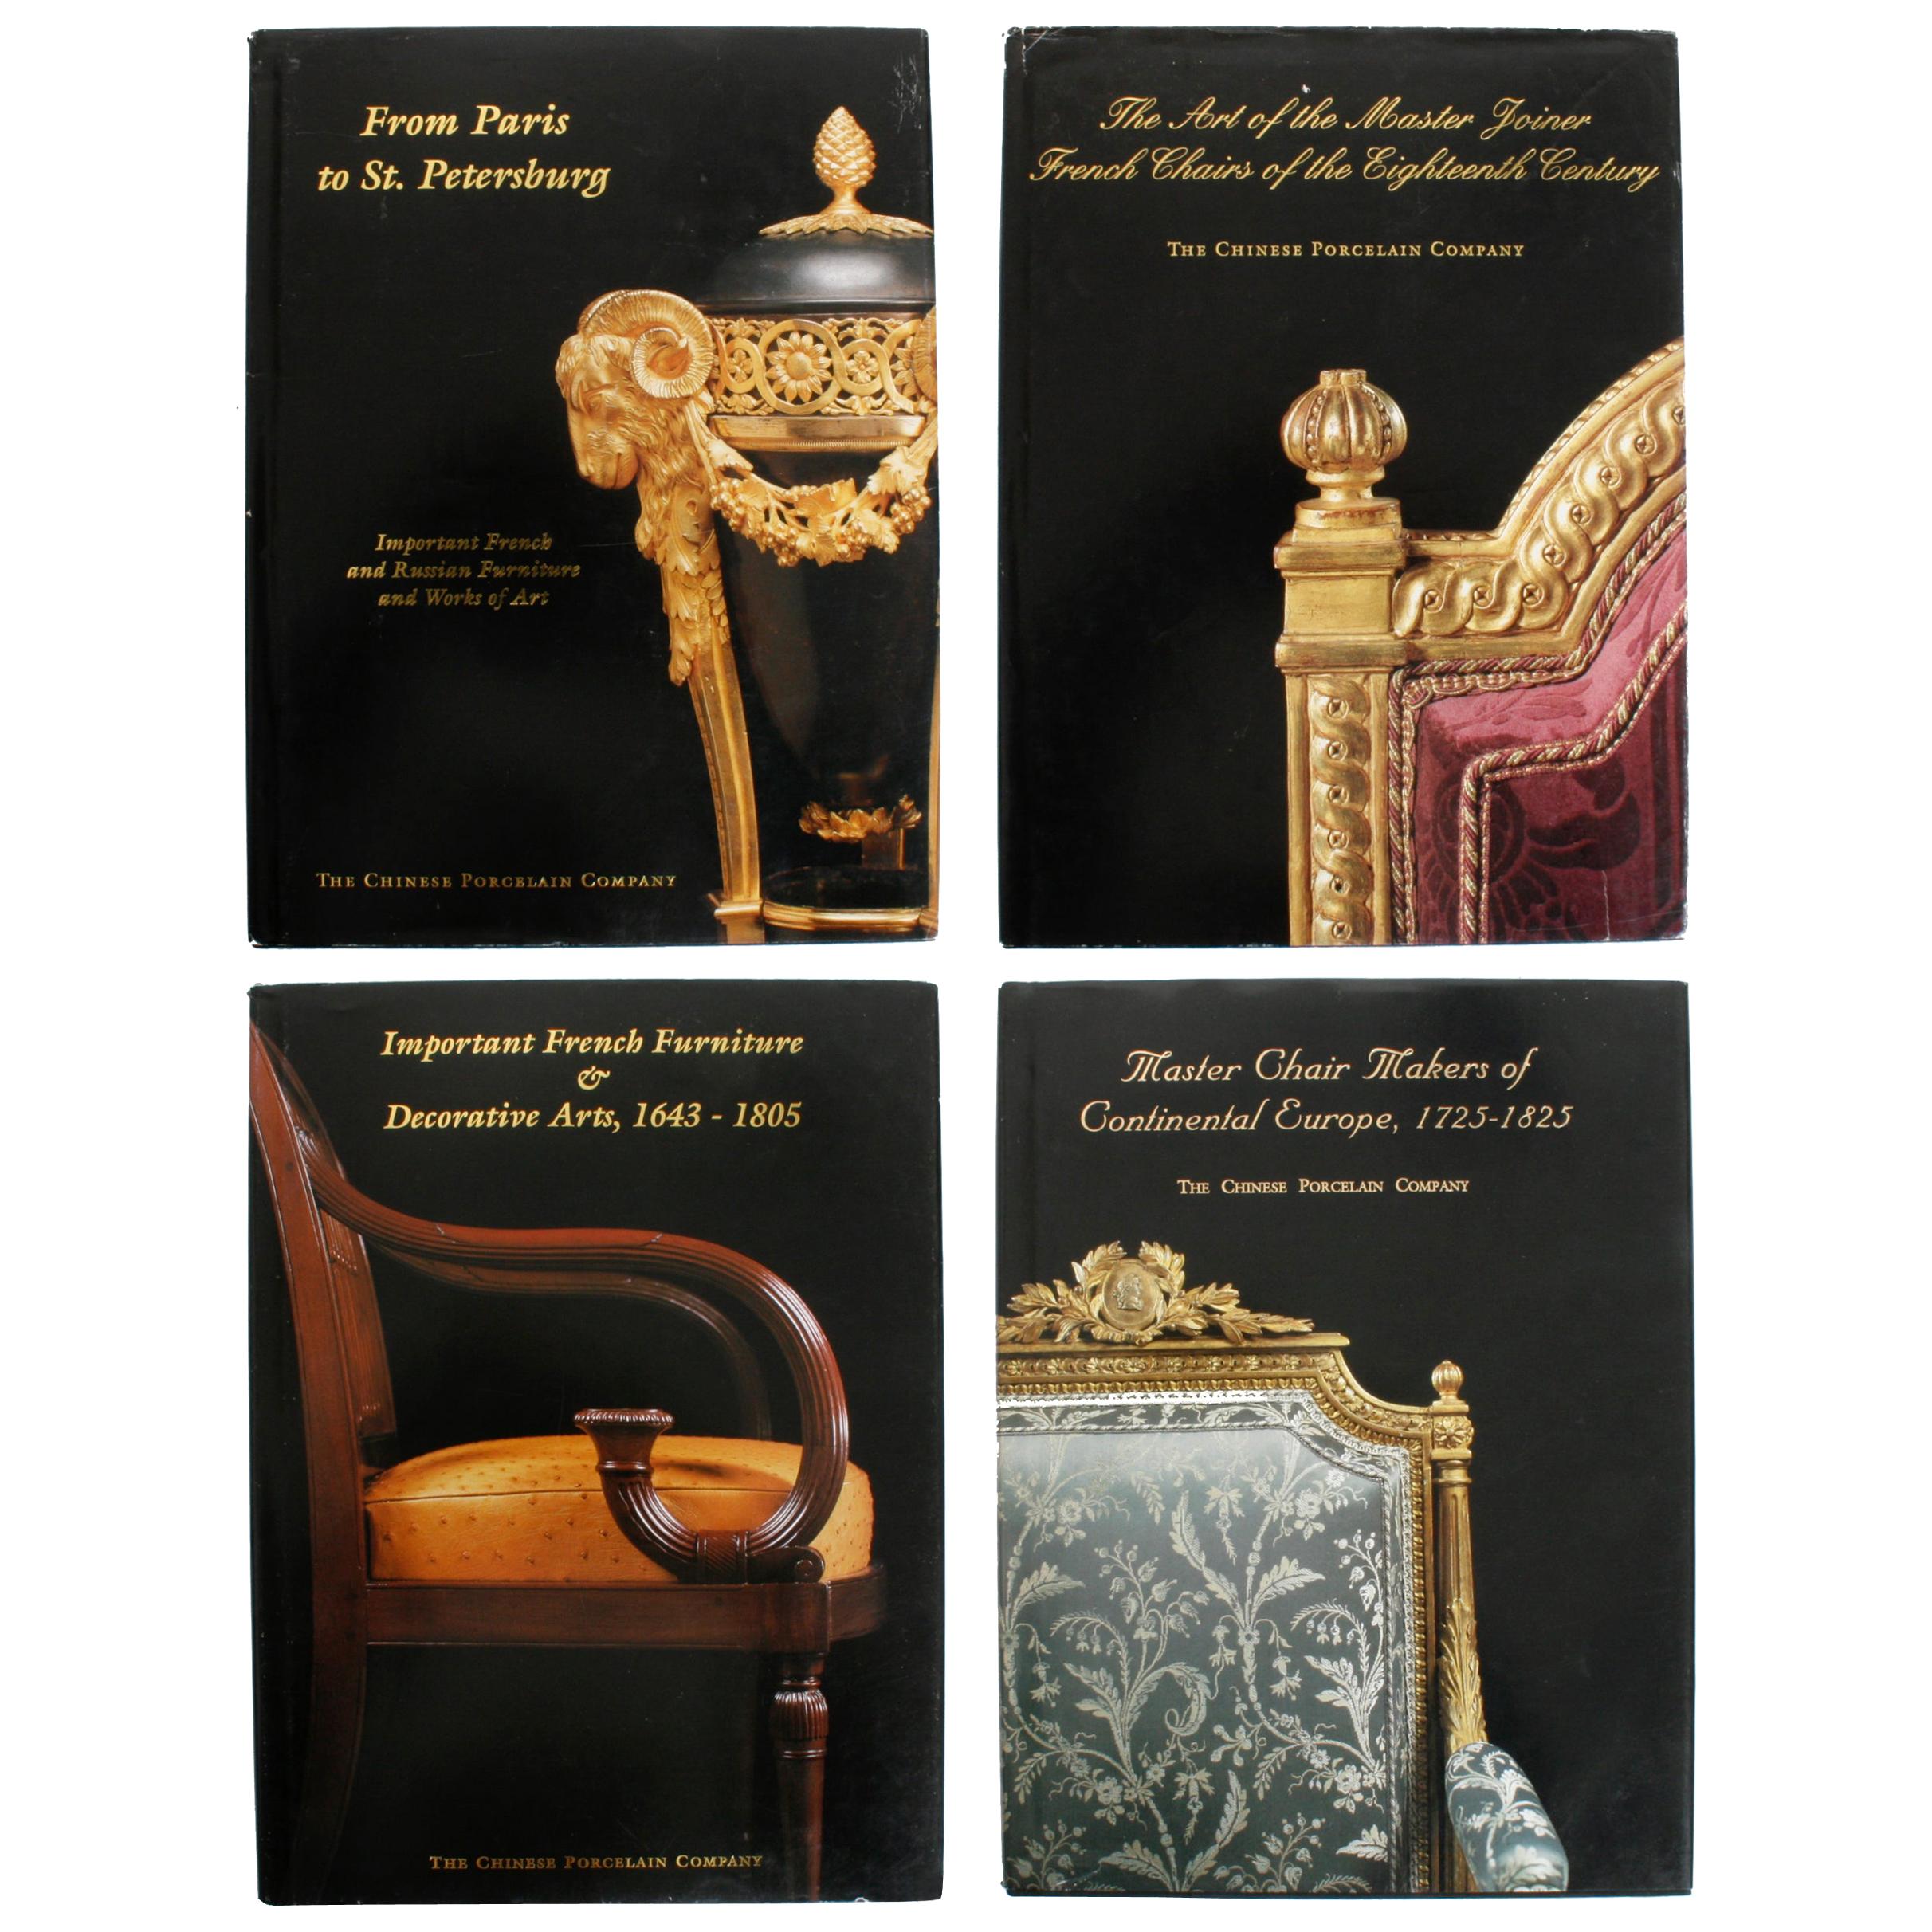 4 Catalogues of Continental Antiques from the Chinese Porcelain Company